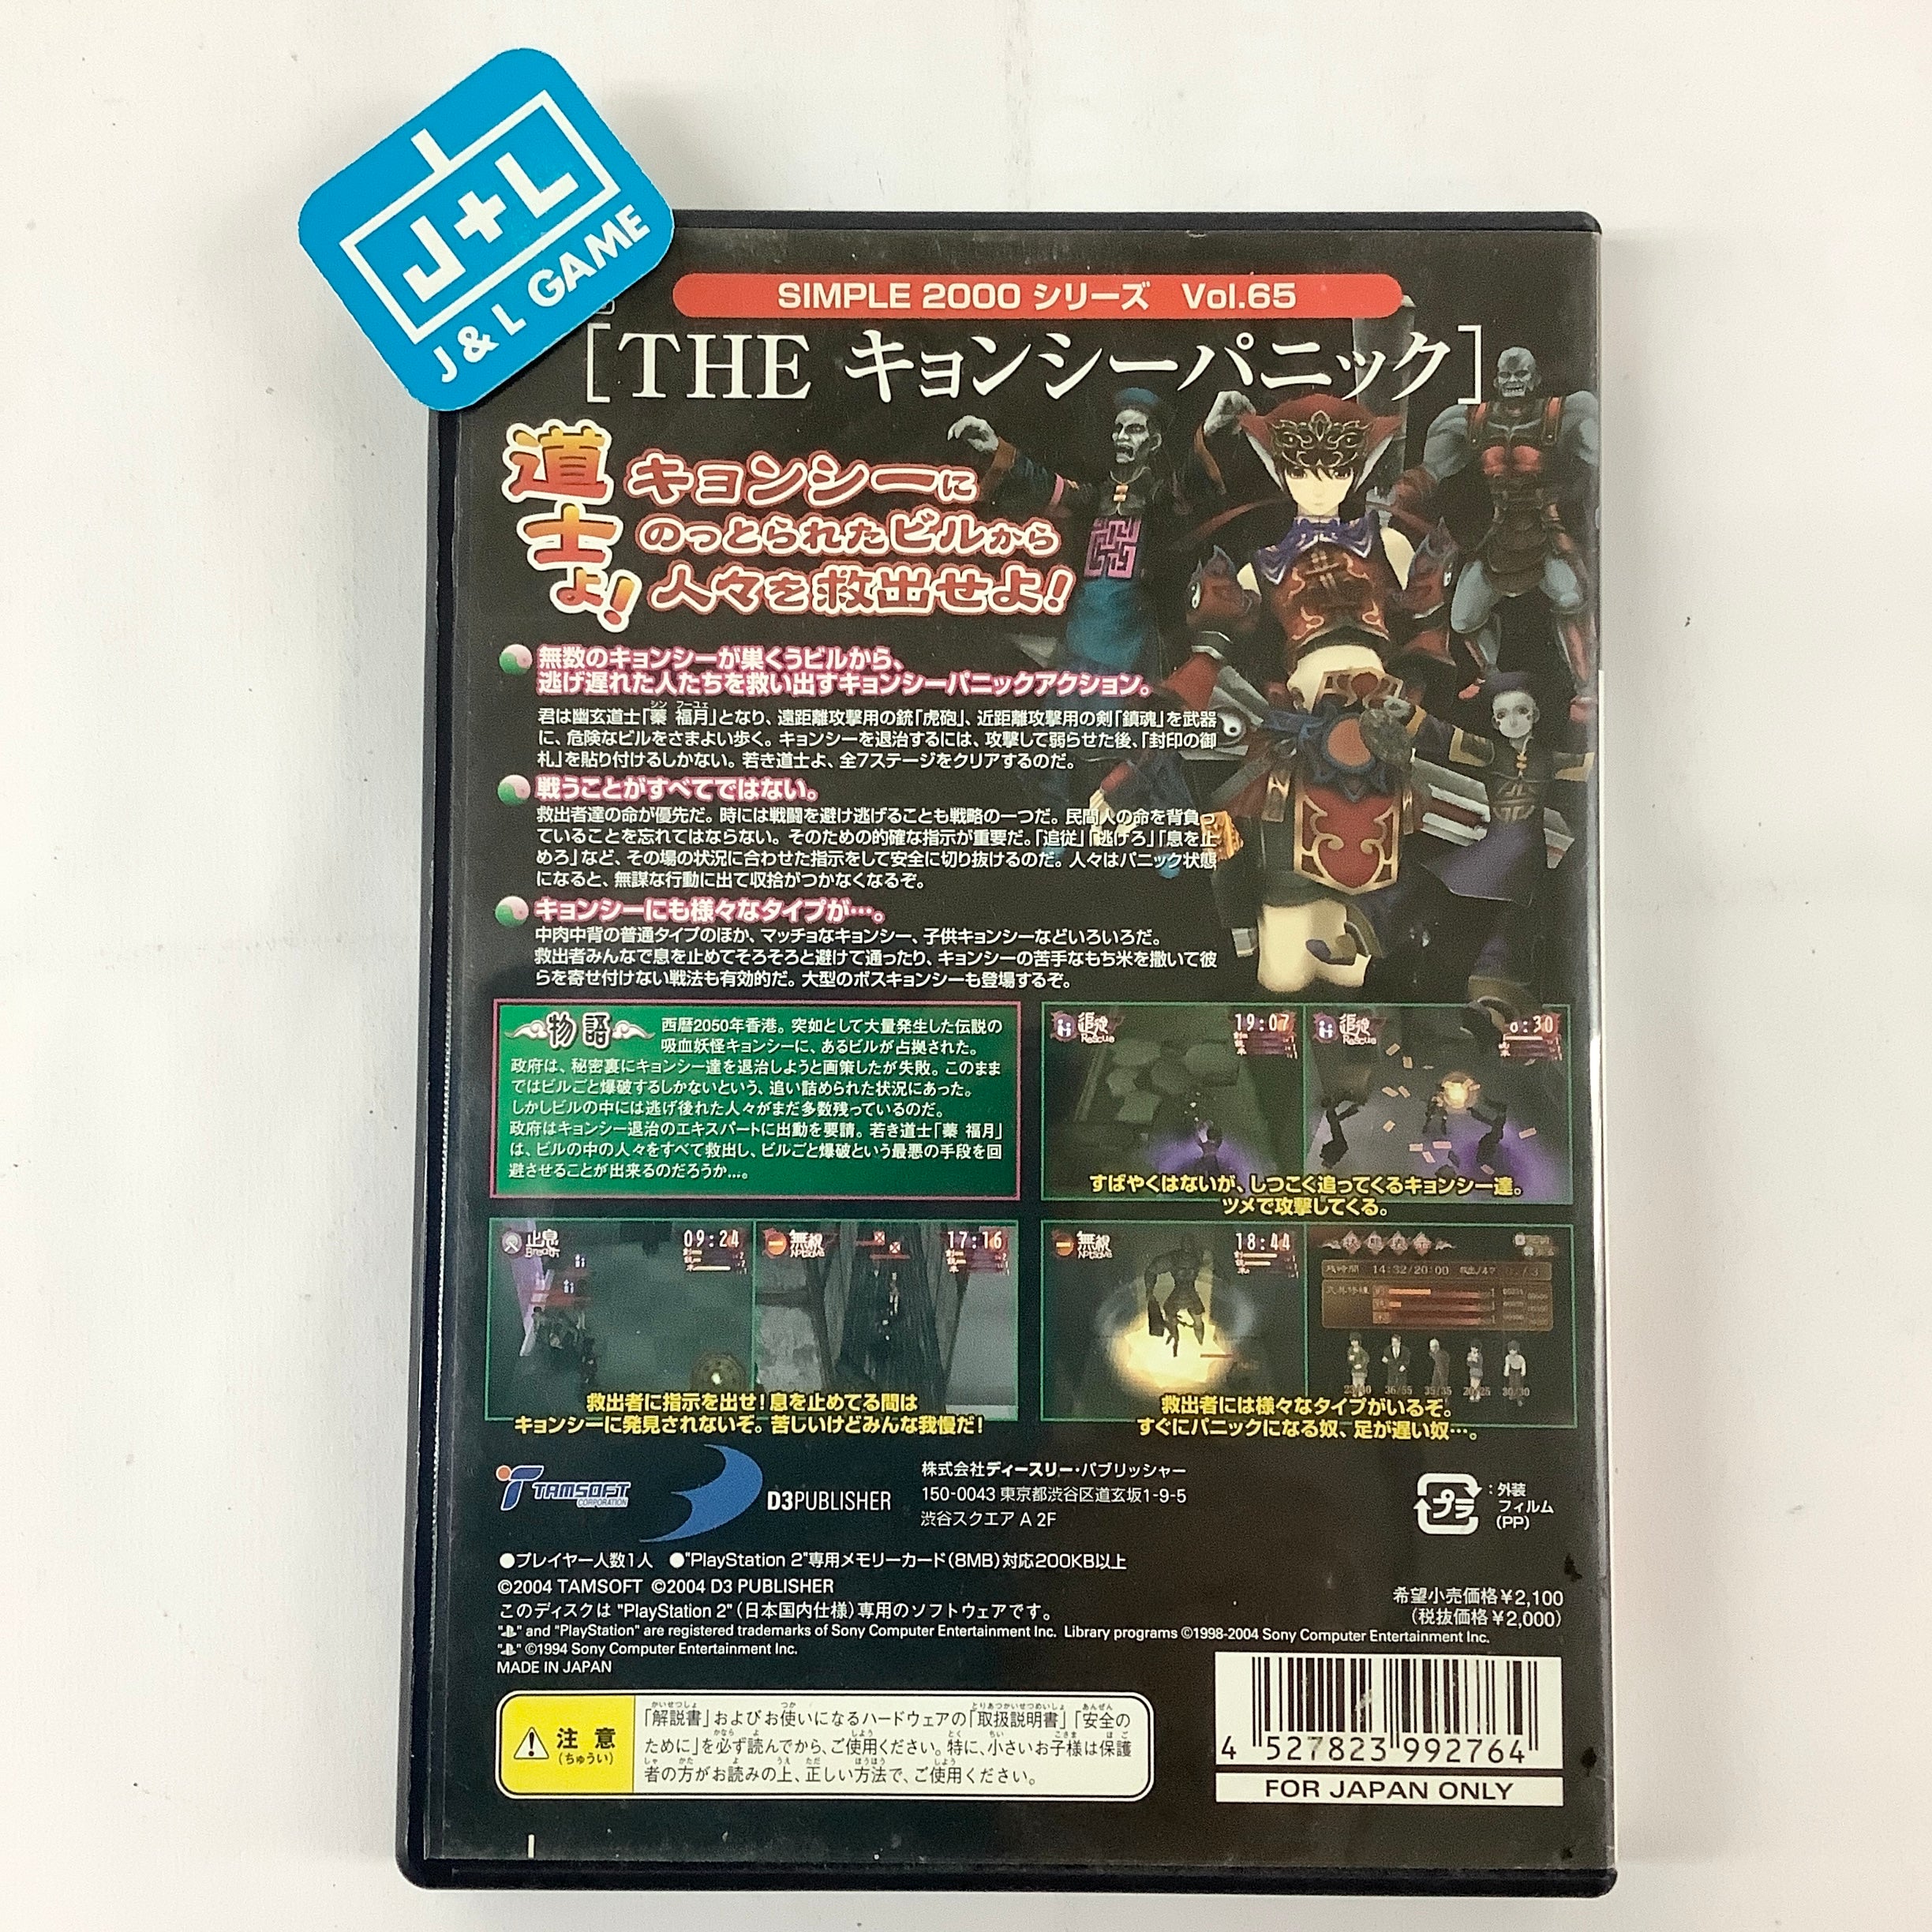 Simple 2000 Series Vol. 65: The Kyonshi Panic - (PS2) PlayStation 2 [Pre-Owned] (Japanese Import) Video Games D3Publisher   